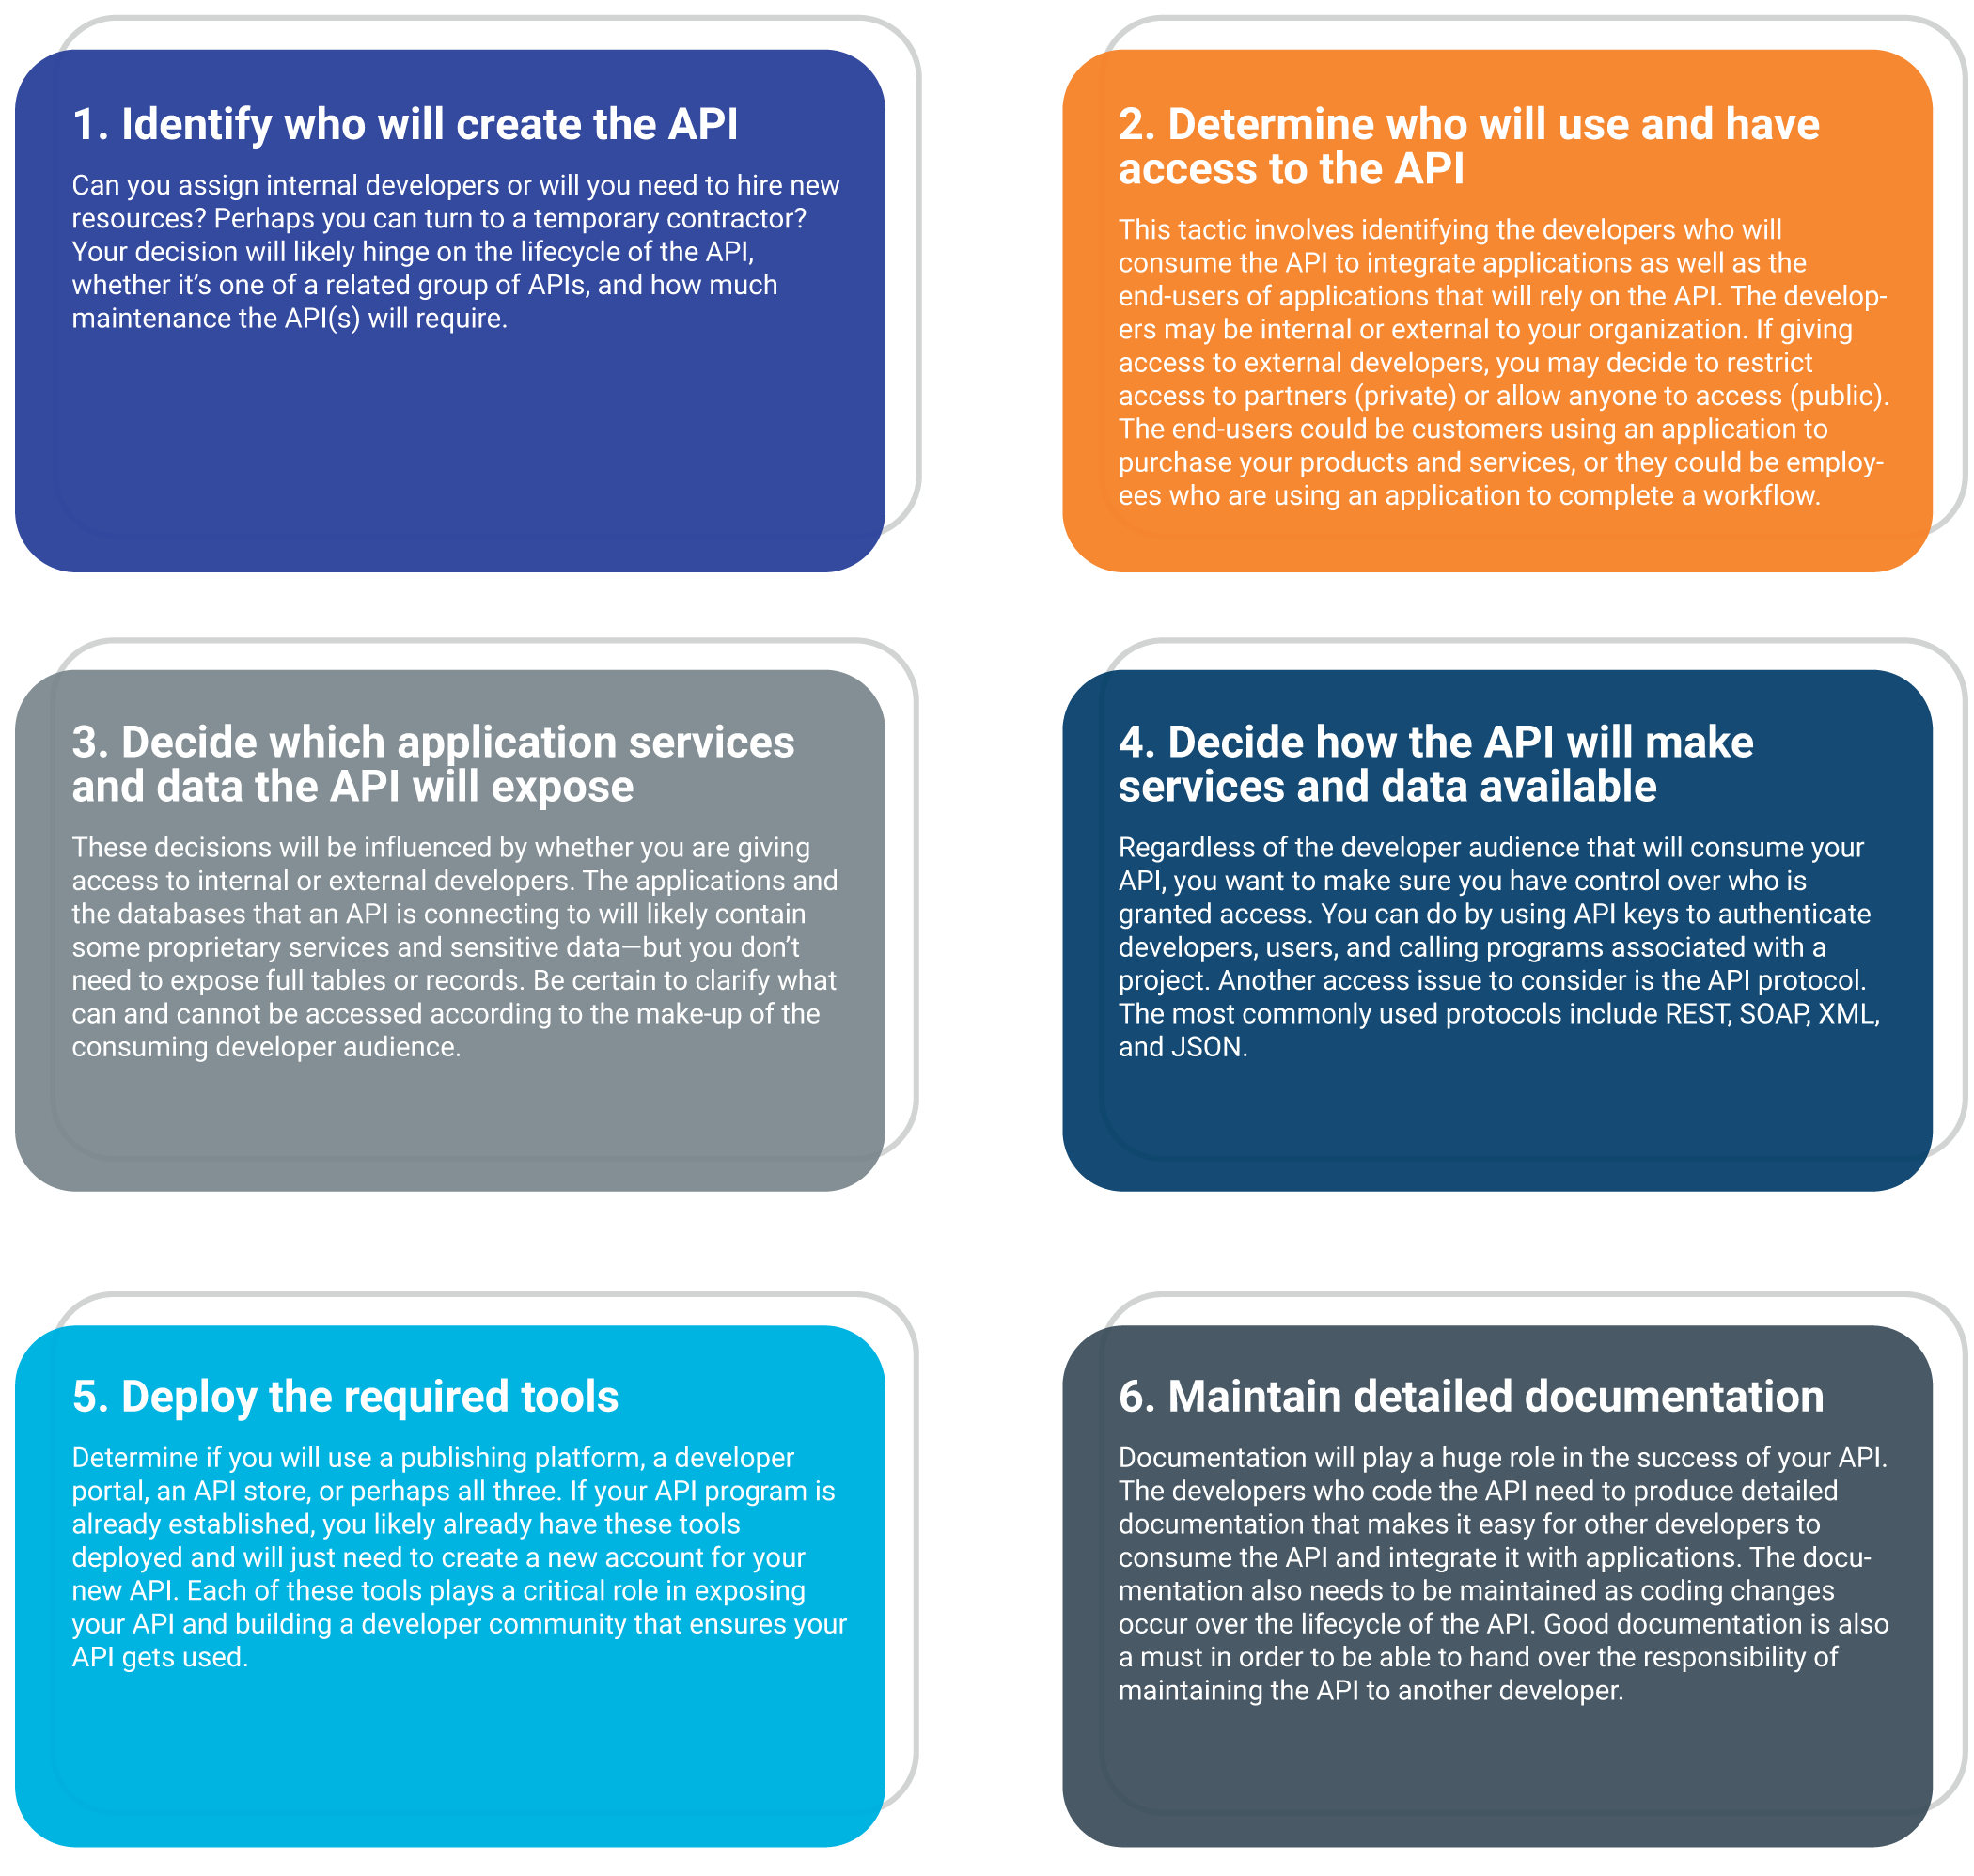 Developing a Tactical API Strategy Infographic